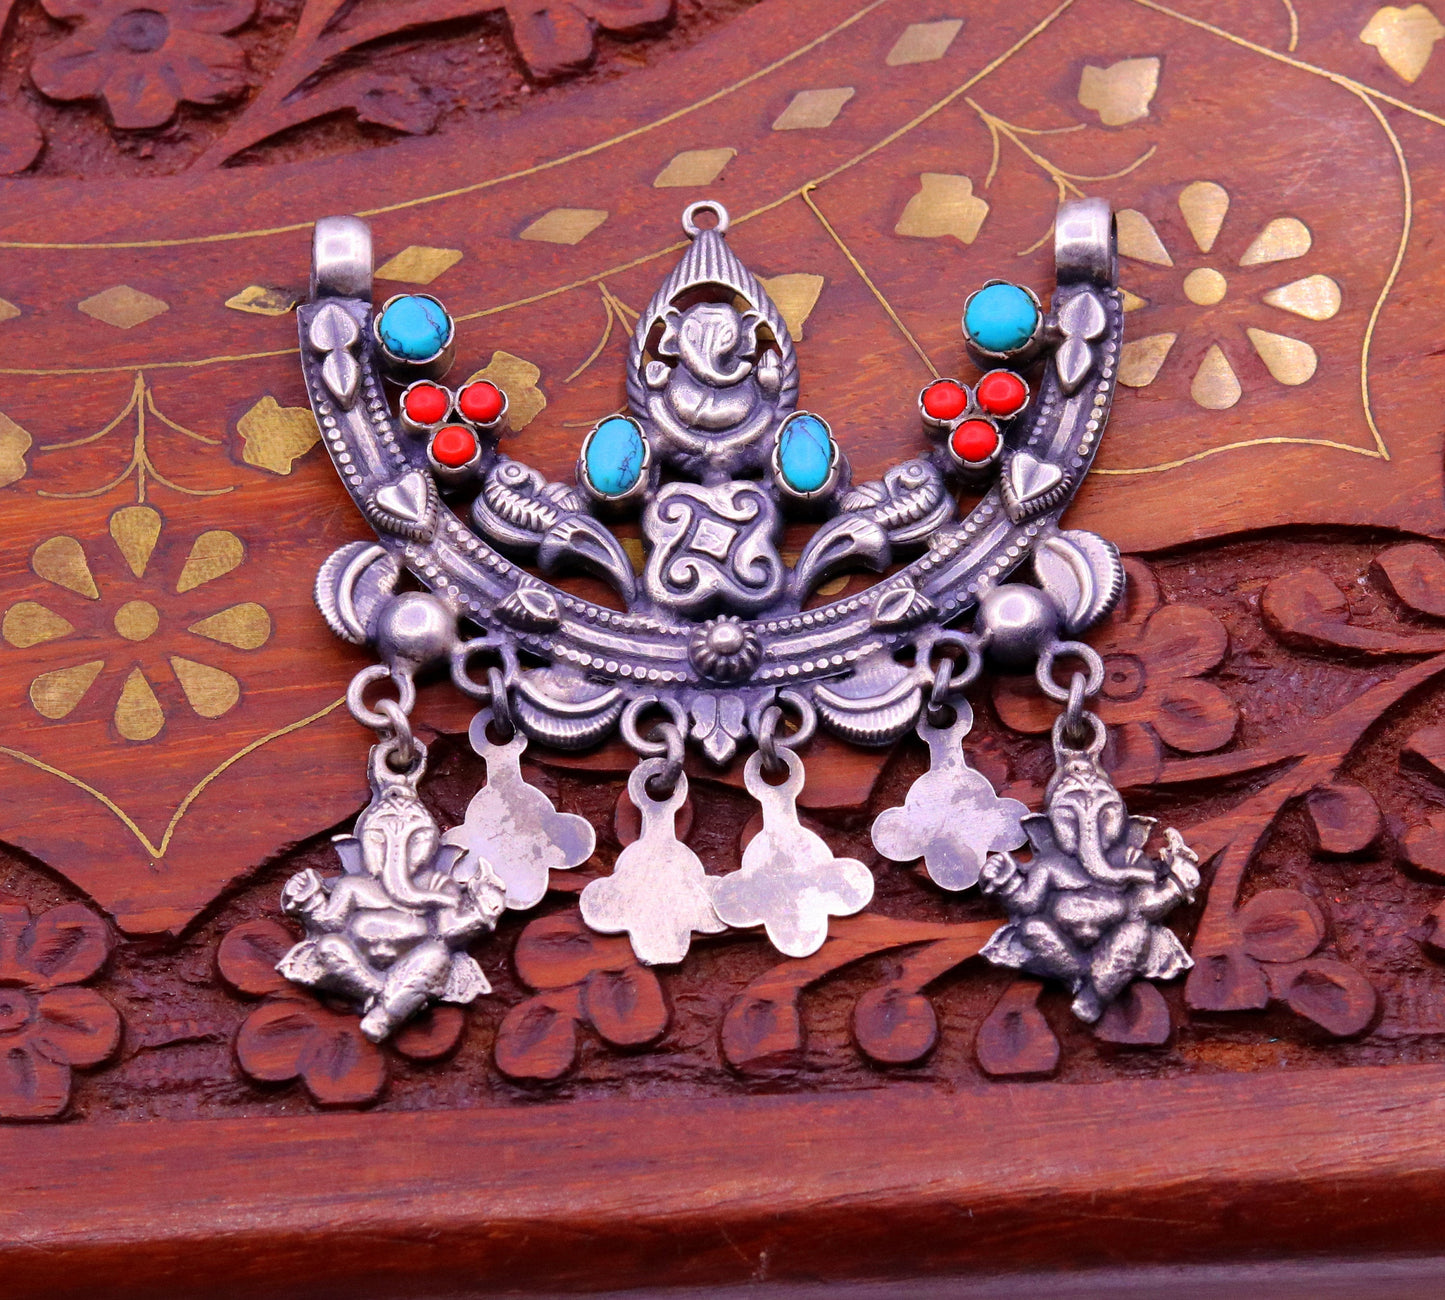 925 Sterling silver handmade vintage ethnic Ganesha design pendant amazing turquoise coral stone pendant tribal belly dance jewelry nsp298 - TRIBAL ORNAMENTS